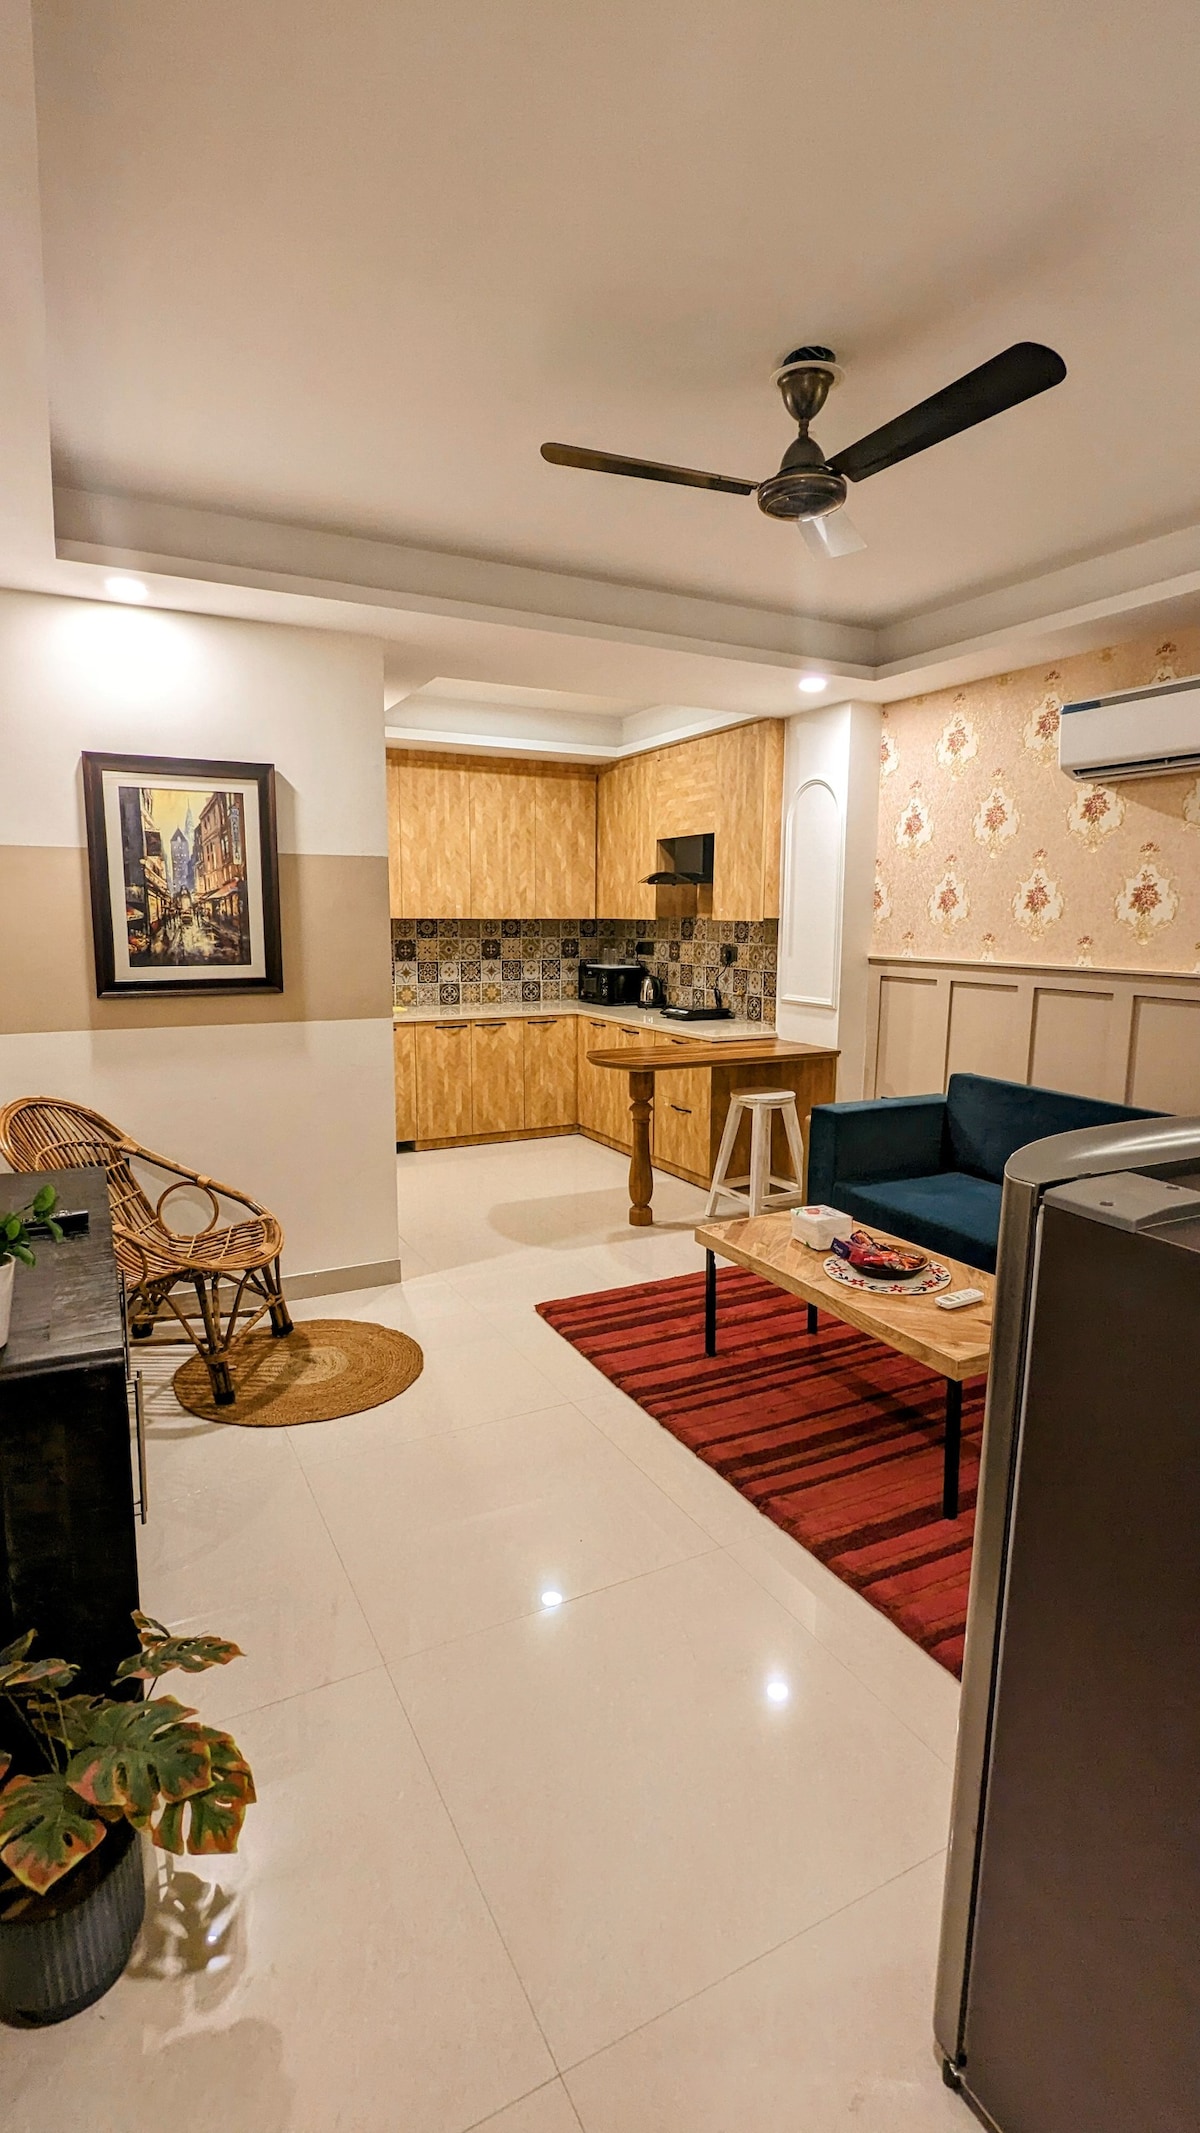 Rio -  - 1bhk, forest view, early check in & W-Fi